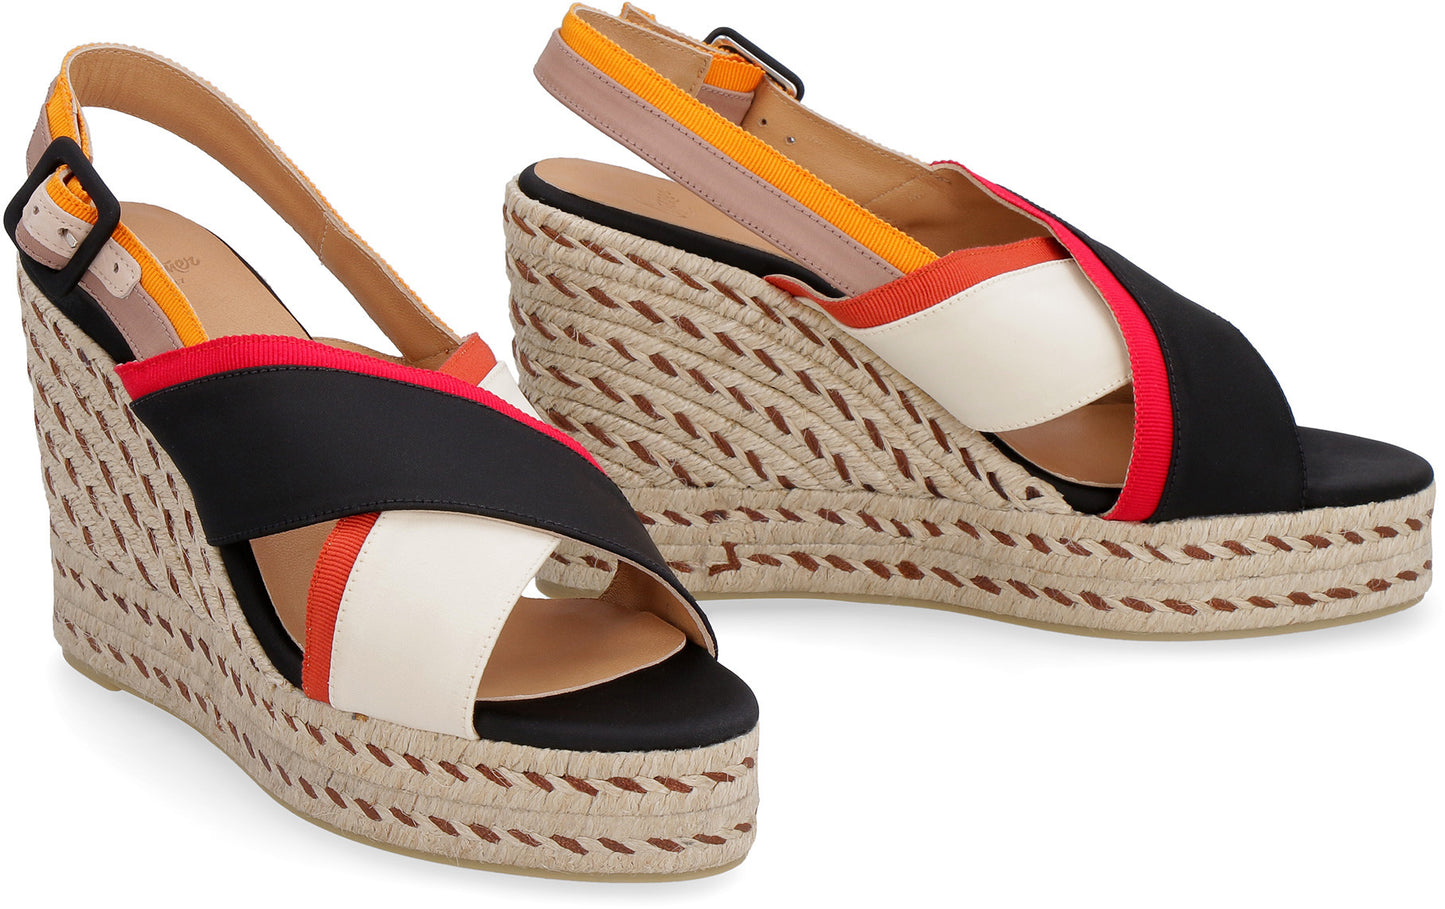 Barbara wedges with crossed bands